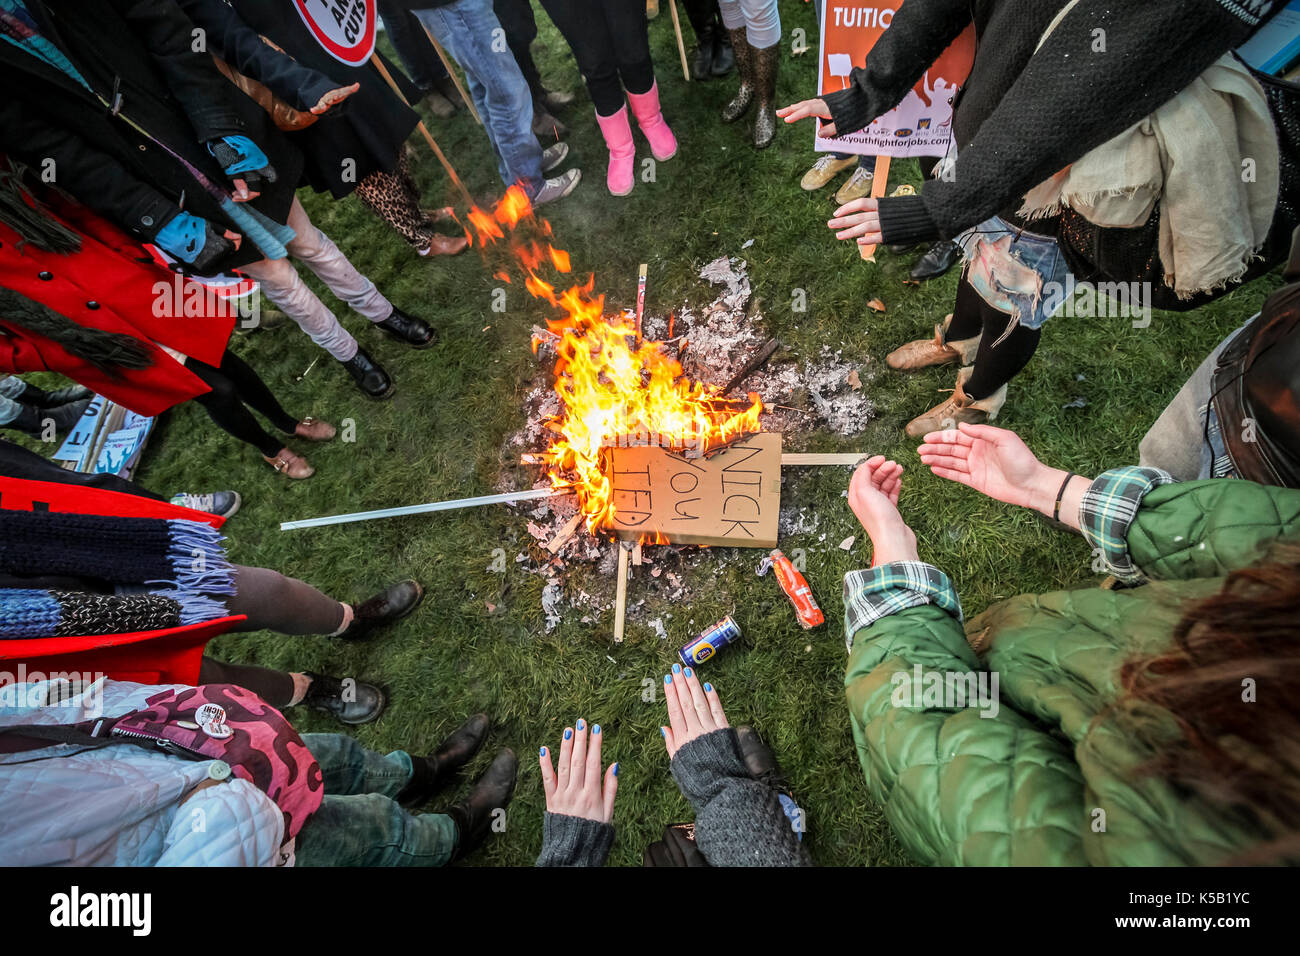 Burning placards. Mass student protests and civil unrest in London against increases in university tuition fees. Stock Photo